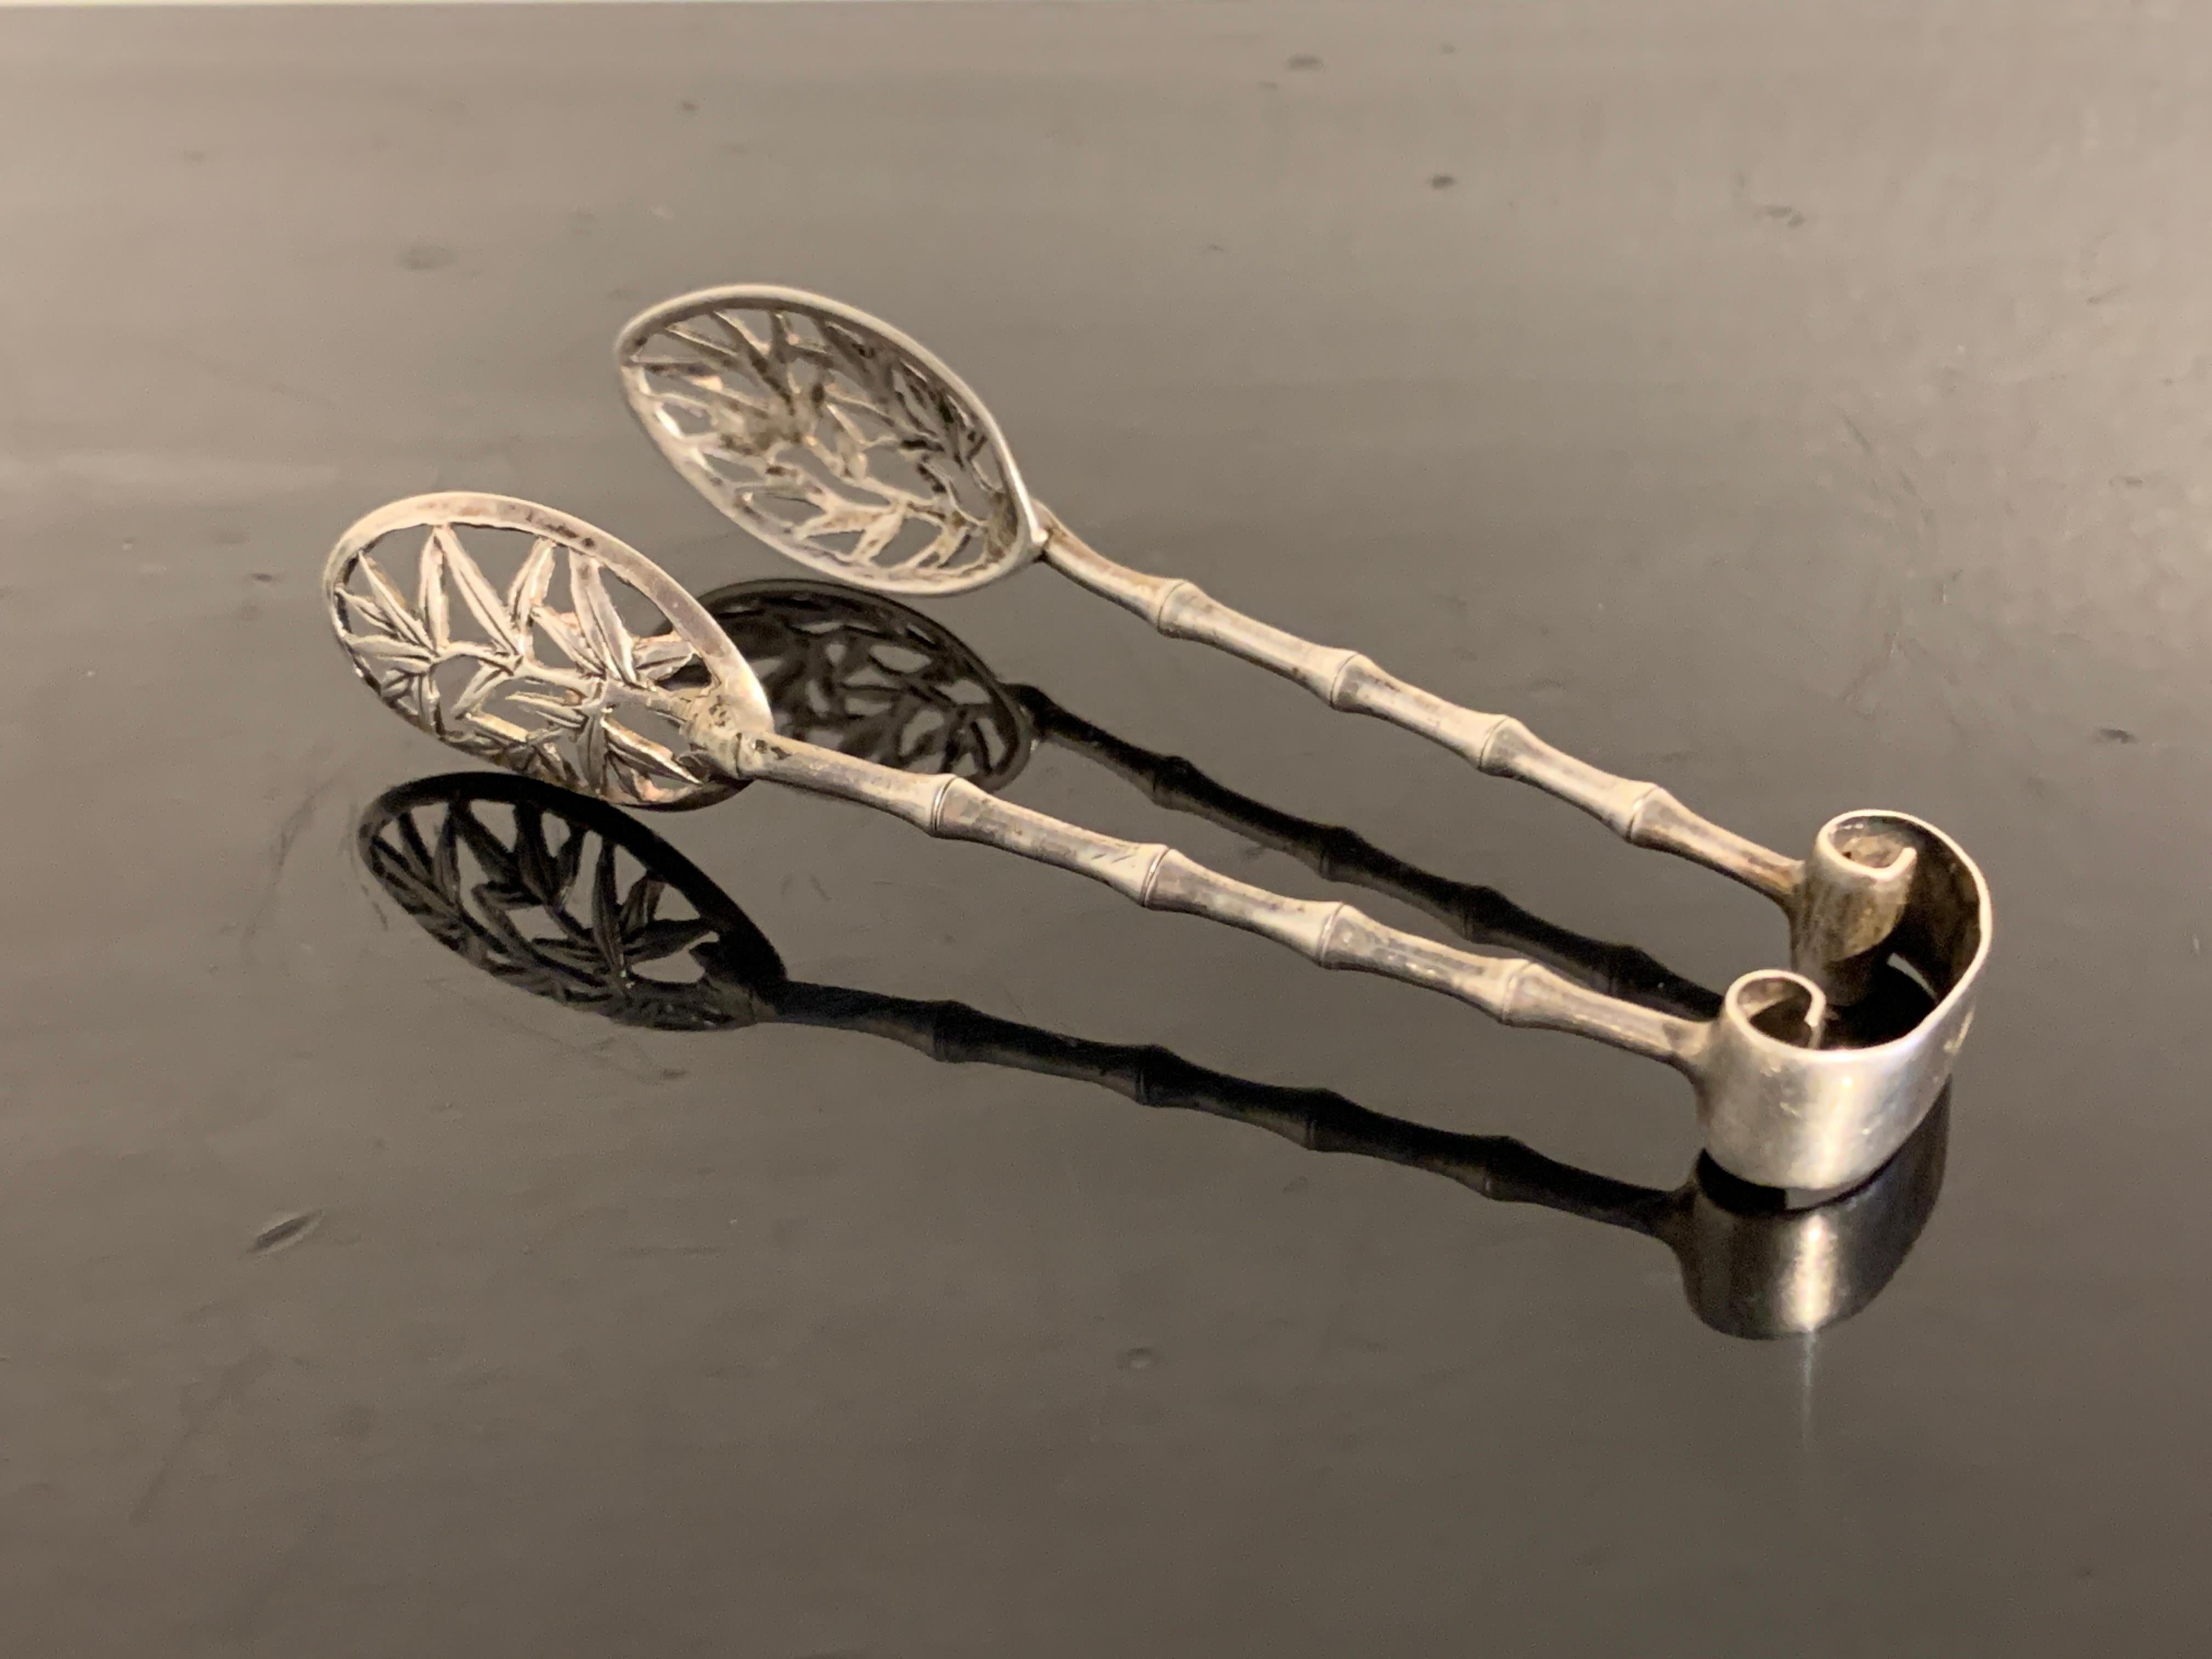 A wonderful pair of Chinese export silver small sugar tongs in a bamboo pattern by Luen Wo, late 19th or early 20th century, Shanghai, China.

The small silver tongs wonderfully crafted with an openwork design of bamboo leaves and bamboo patterned